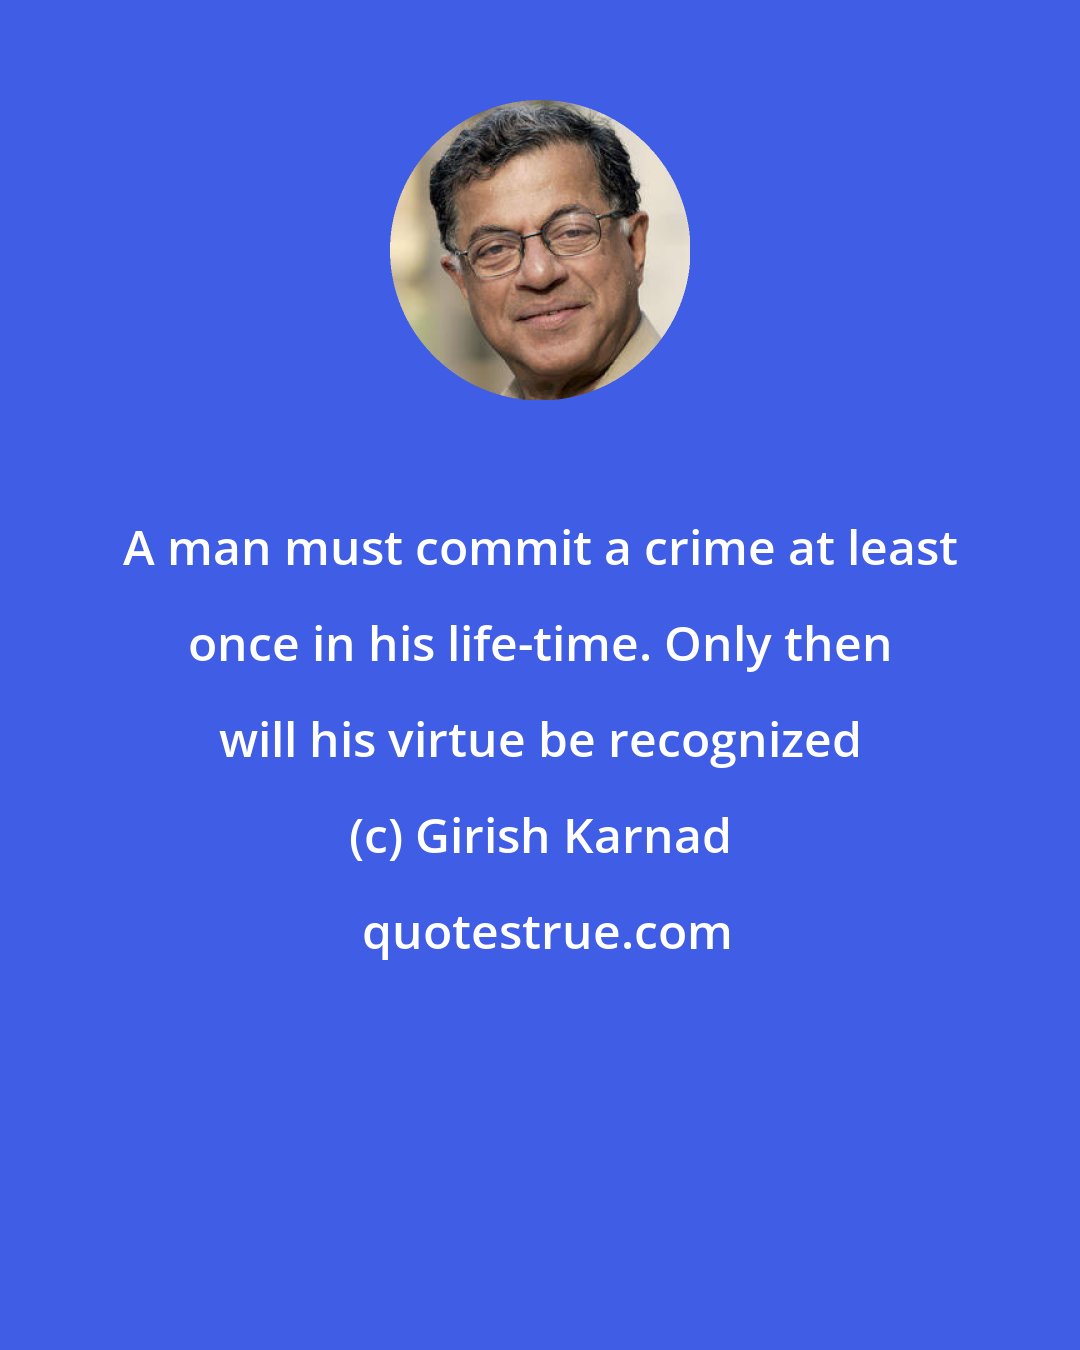 Girish Karnad: A man must commit a crime at least once in his life-time. Only then will his virtue be recognized